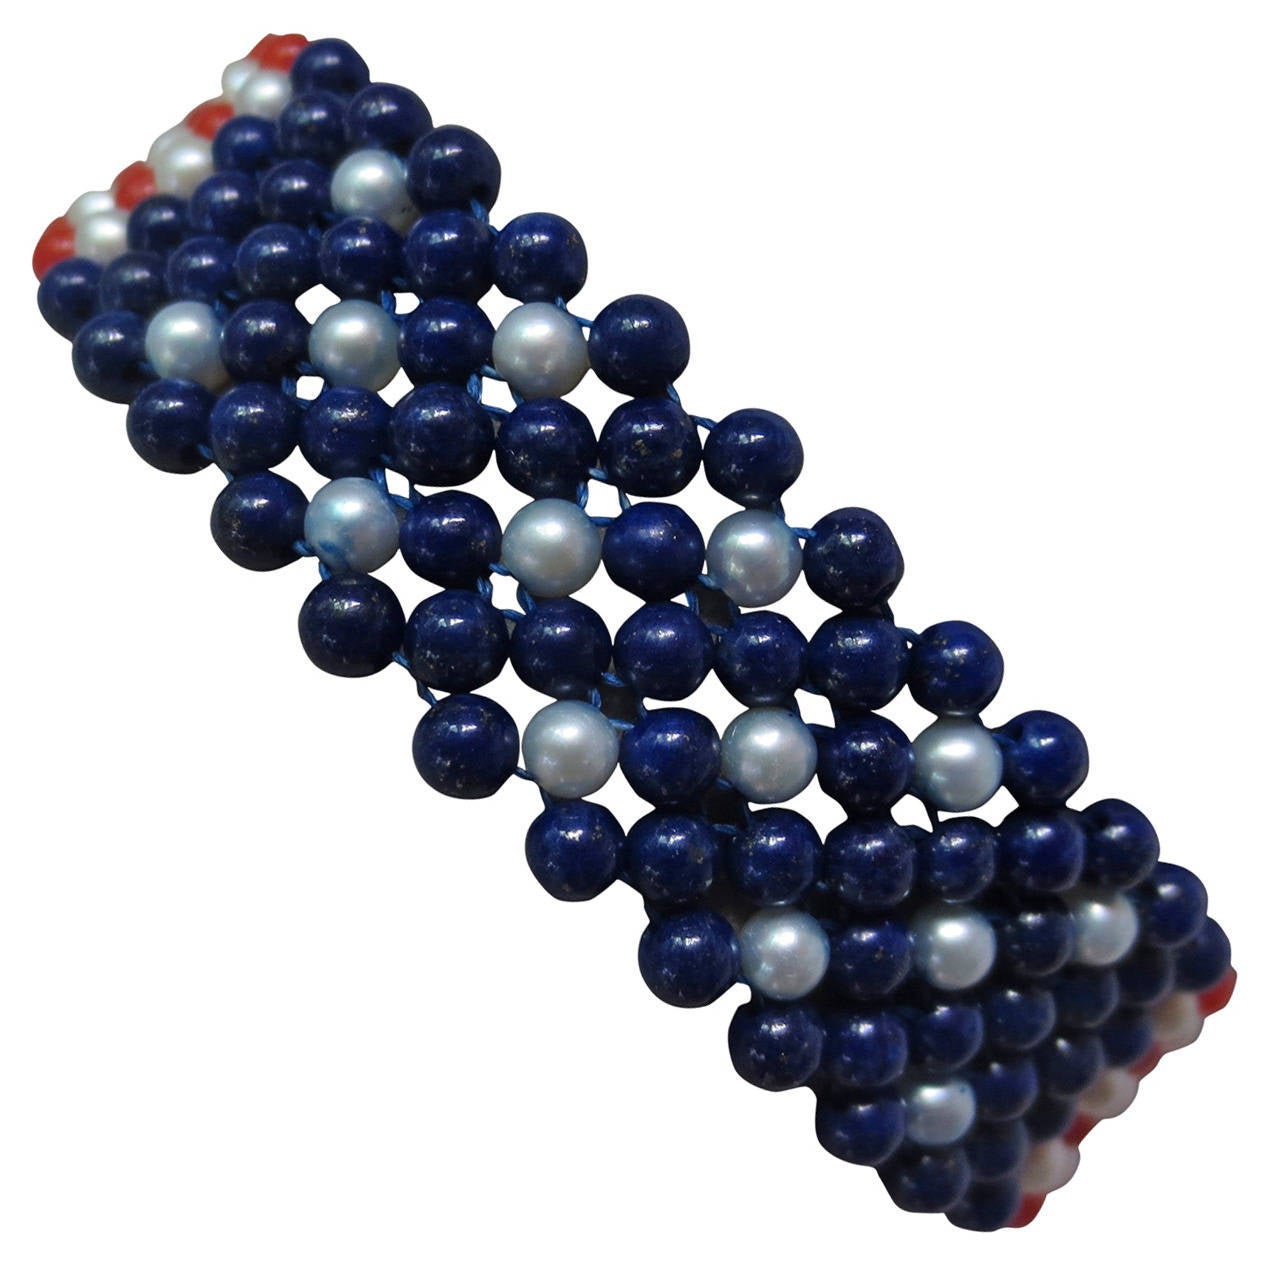 Show your pride for Old Glory.

This unique bracelet designed by Marina J is the perfect piece to wear intime for the upcoming election. 2.5-3 mm beads of culture pearl, coral, and lapis lazuli are intricately woven to create this marvelous Stars